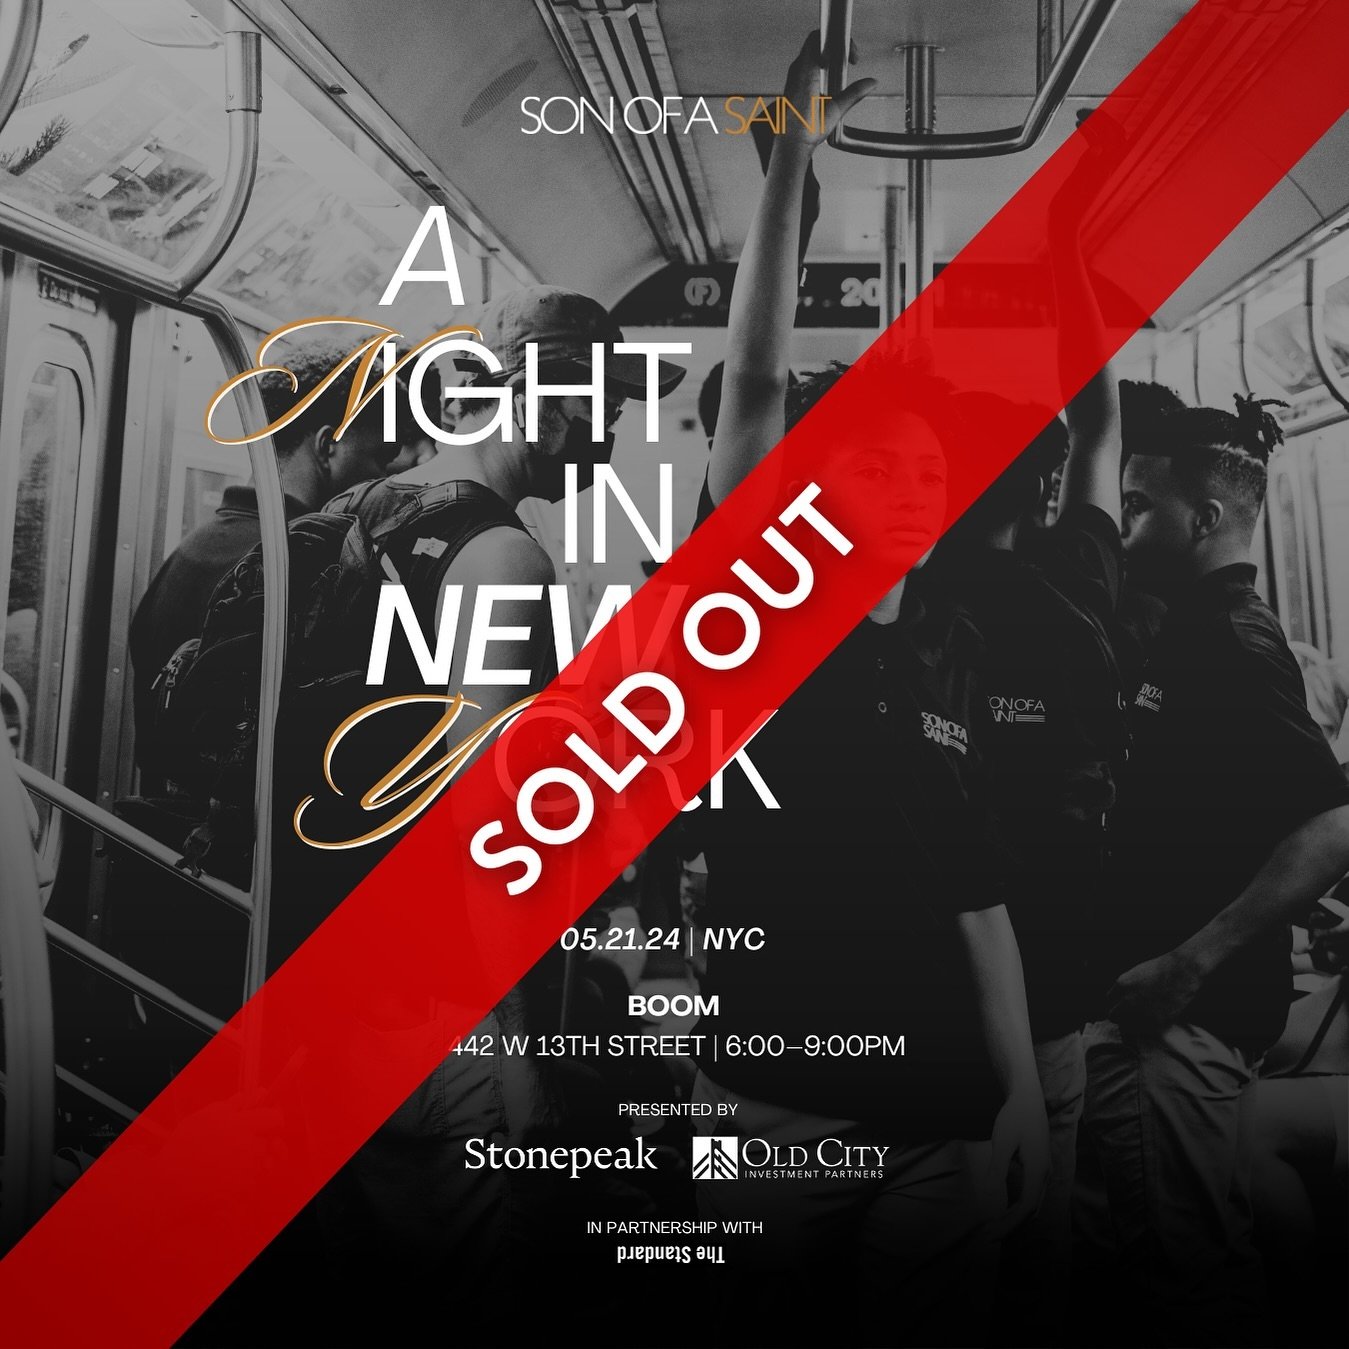 It&rsquo;s happening!🗽🍎We are proud to announce the sellout of a first-of-its-kind signature fundraiser we&rsquo;re hosting on Tuesday, May 21, at the world-famous premier event venue, Boom, located atop the iconic Standard High Line Hotel in New Y